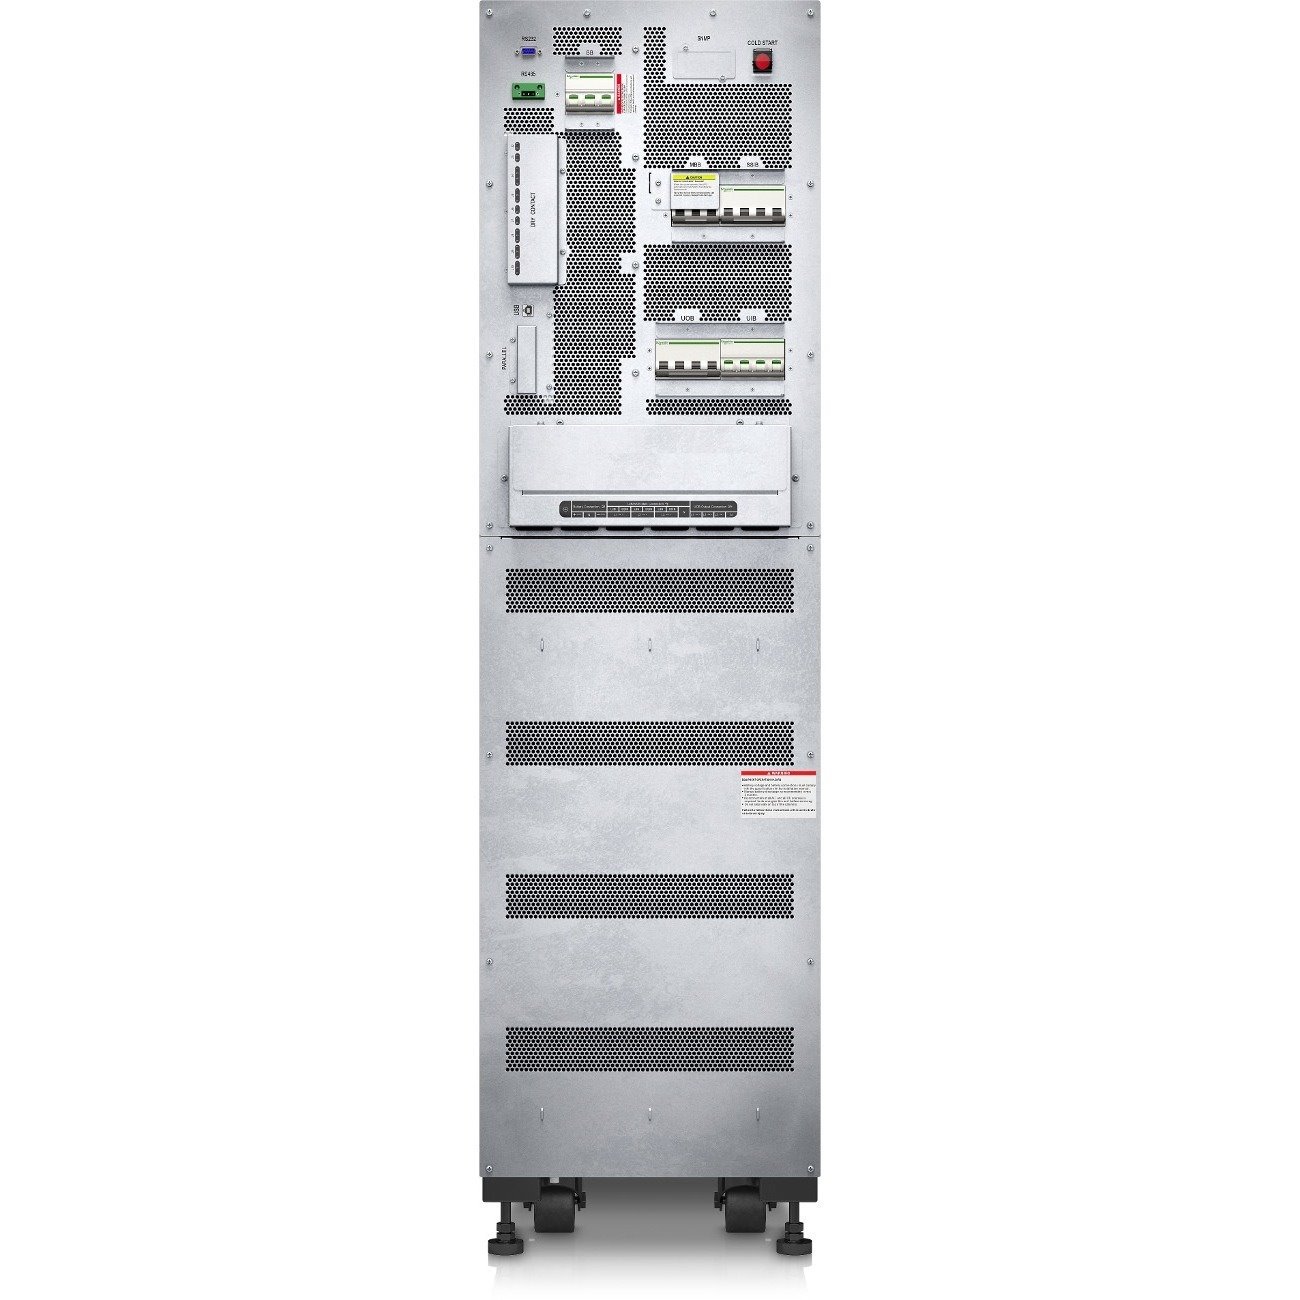 Schneider Electric Easy UPS 3S Double Conversion Online UPS - 20 kVA - Three Phase